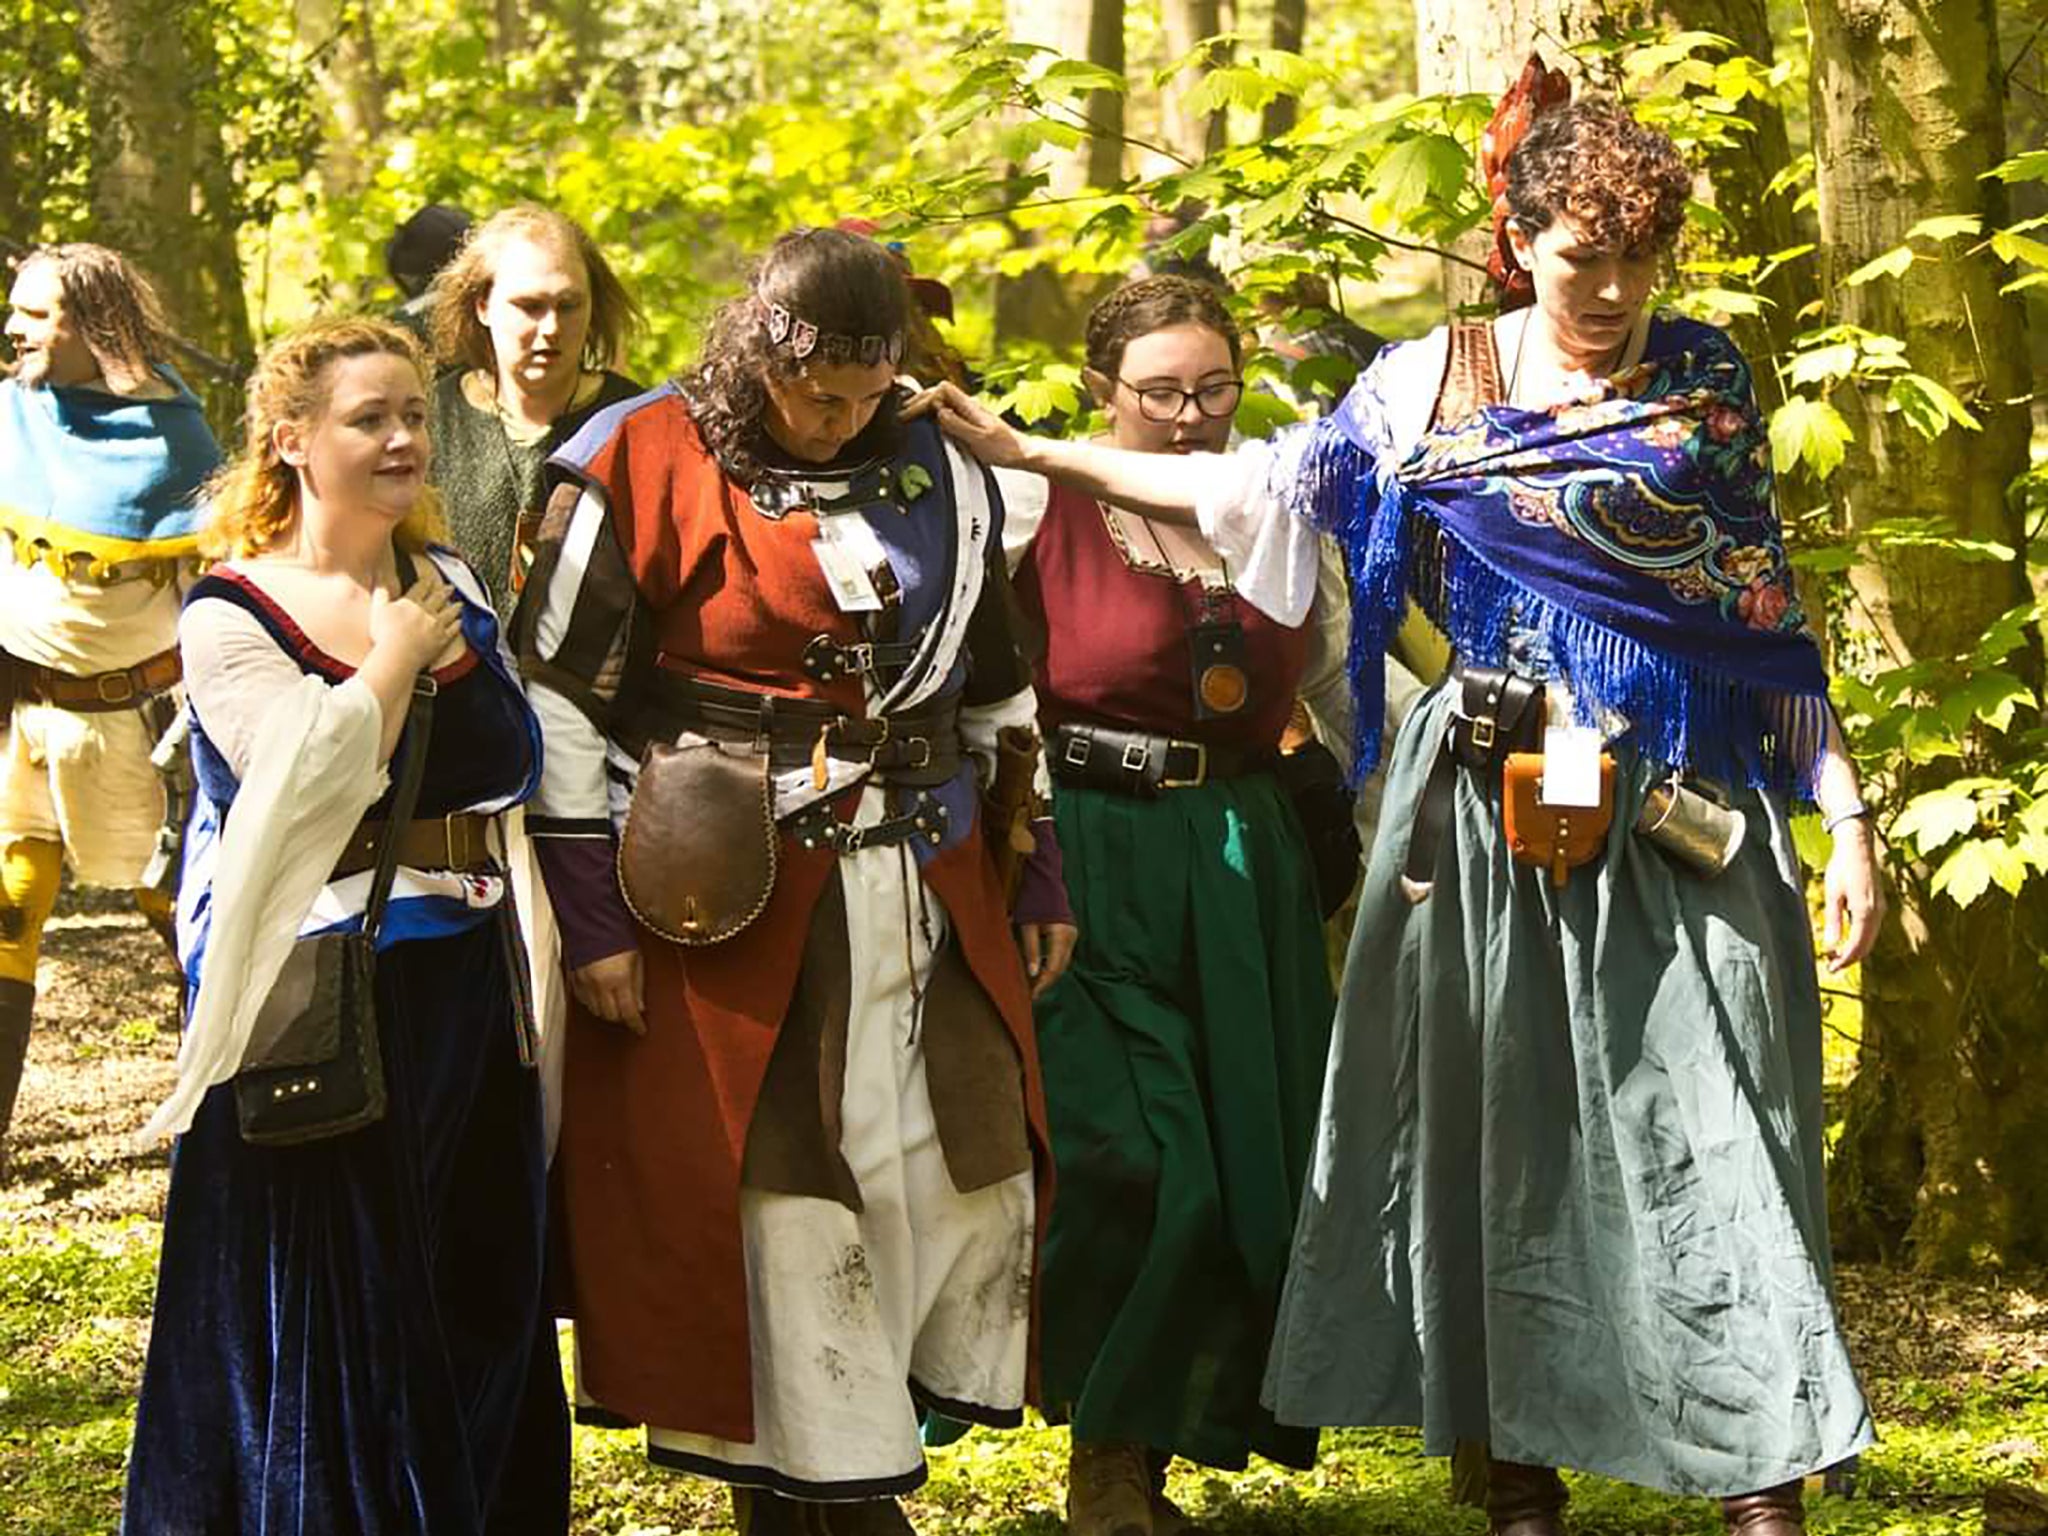 There are hundreds of different larp games being played in the UK right now, all involving hundreds of people interacting as their characters and exploring their own unique skills and backstories